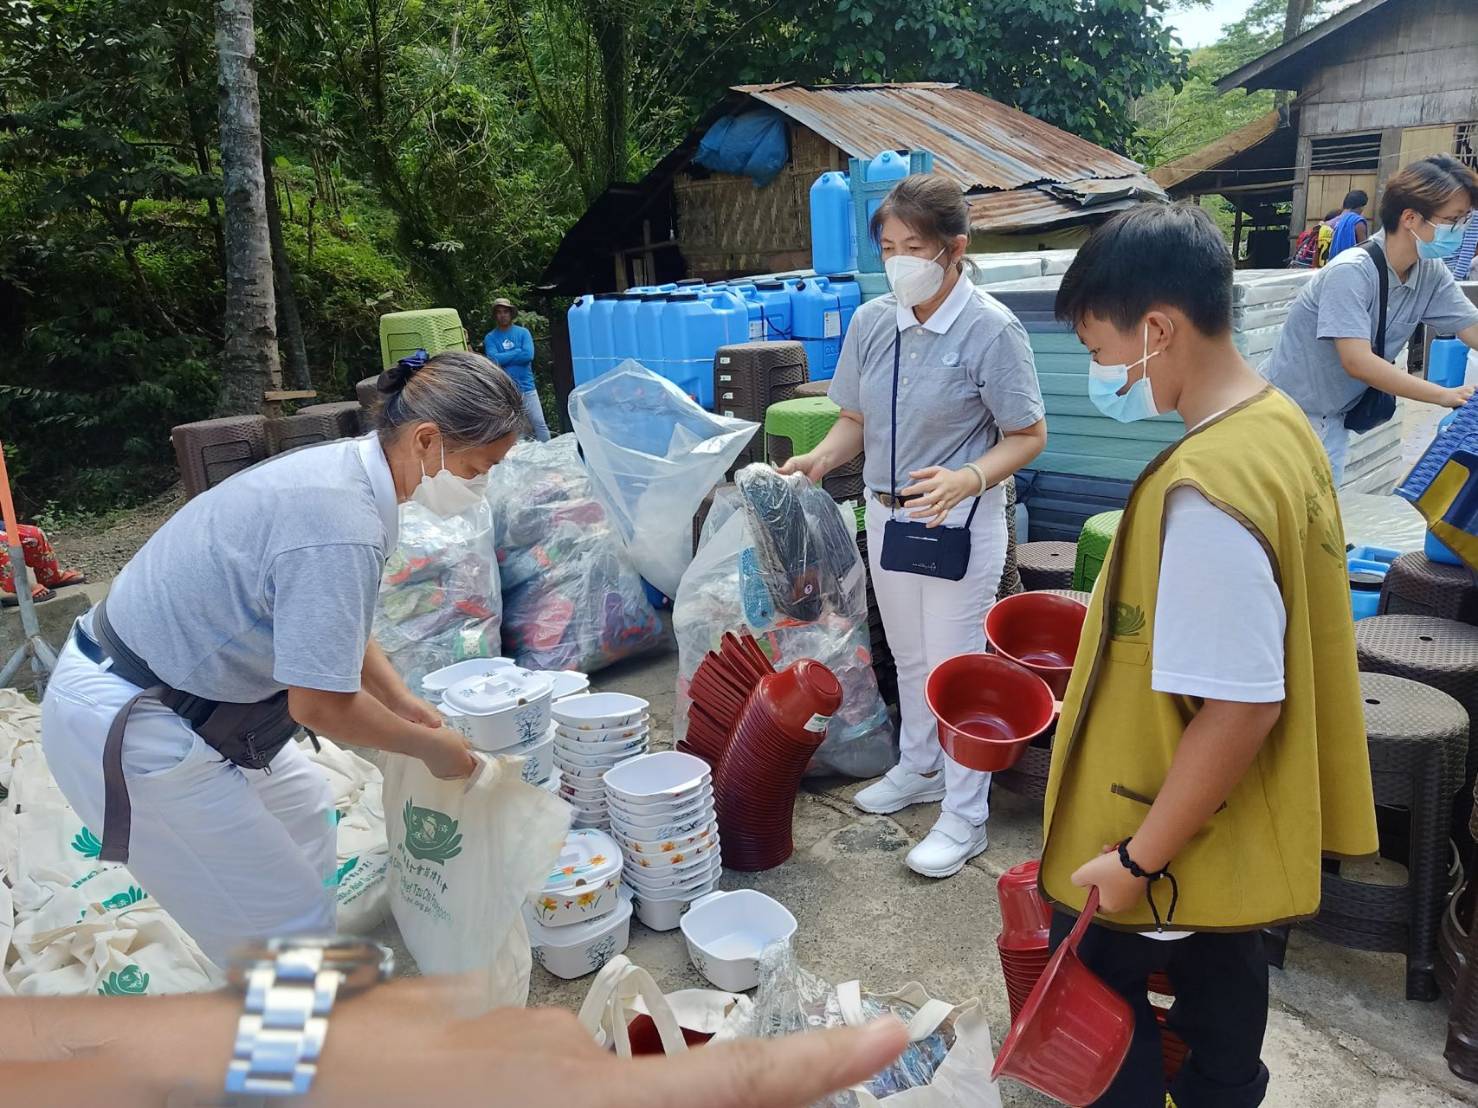 Each family in the community receive 20 kg of rice, 6kg of sugar, pasta, coffee, vitamins, cooking oil, and other various condiments. They also receive tables and chairs, water gallons, buckets, and Tzu Chi eco-bags.